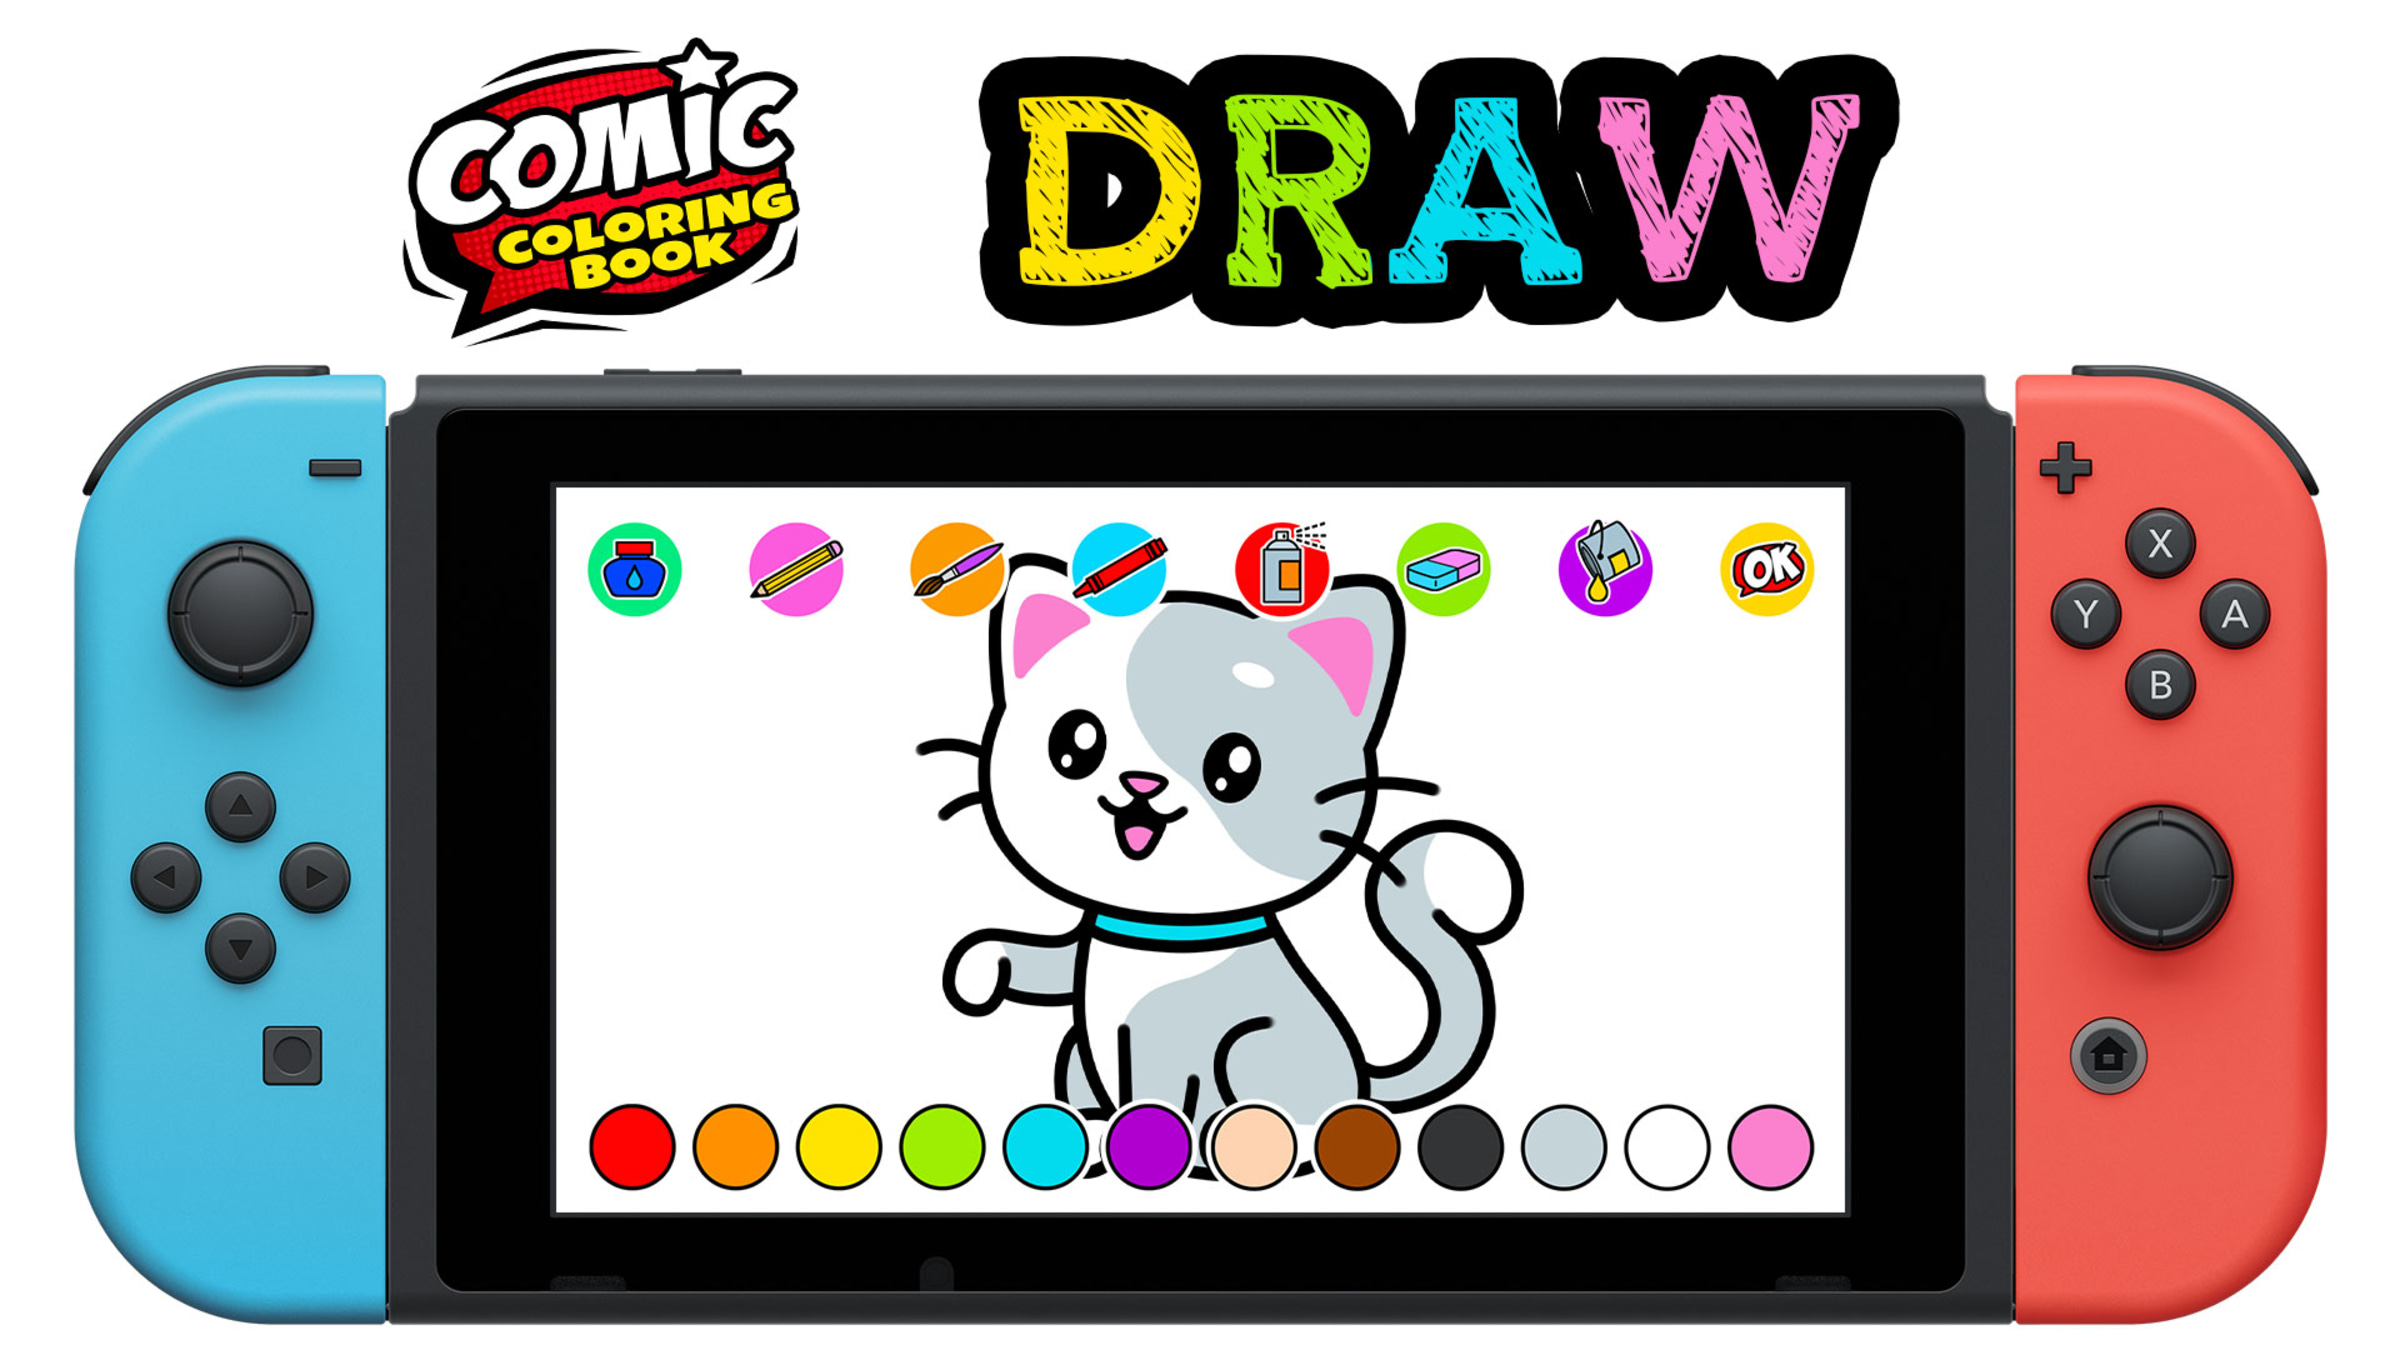 Comic Coloring Book Complete Edition: DRAW for Nintendo Switch - Nintendo  Official Site